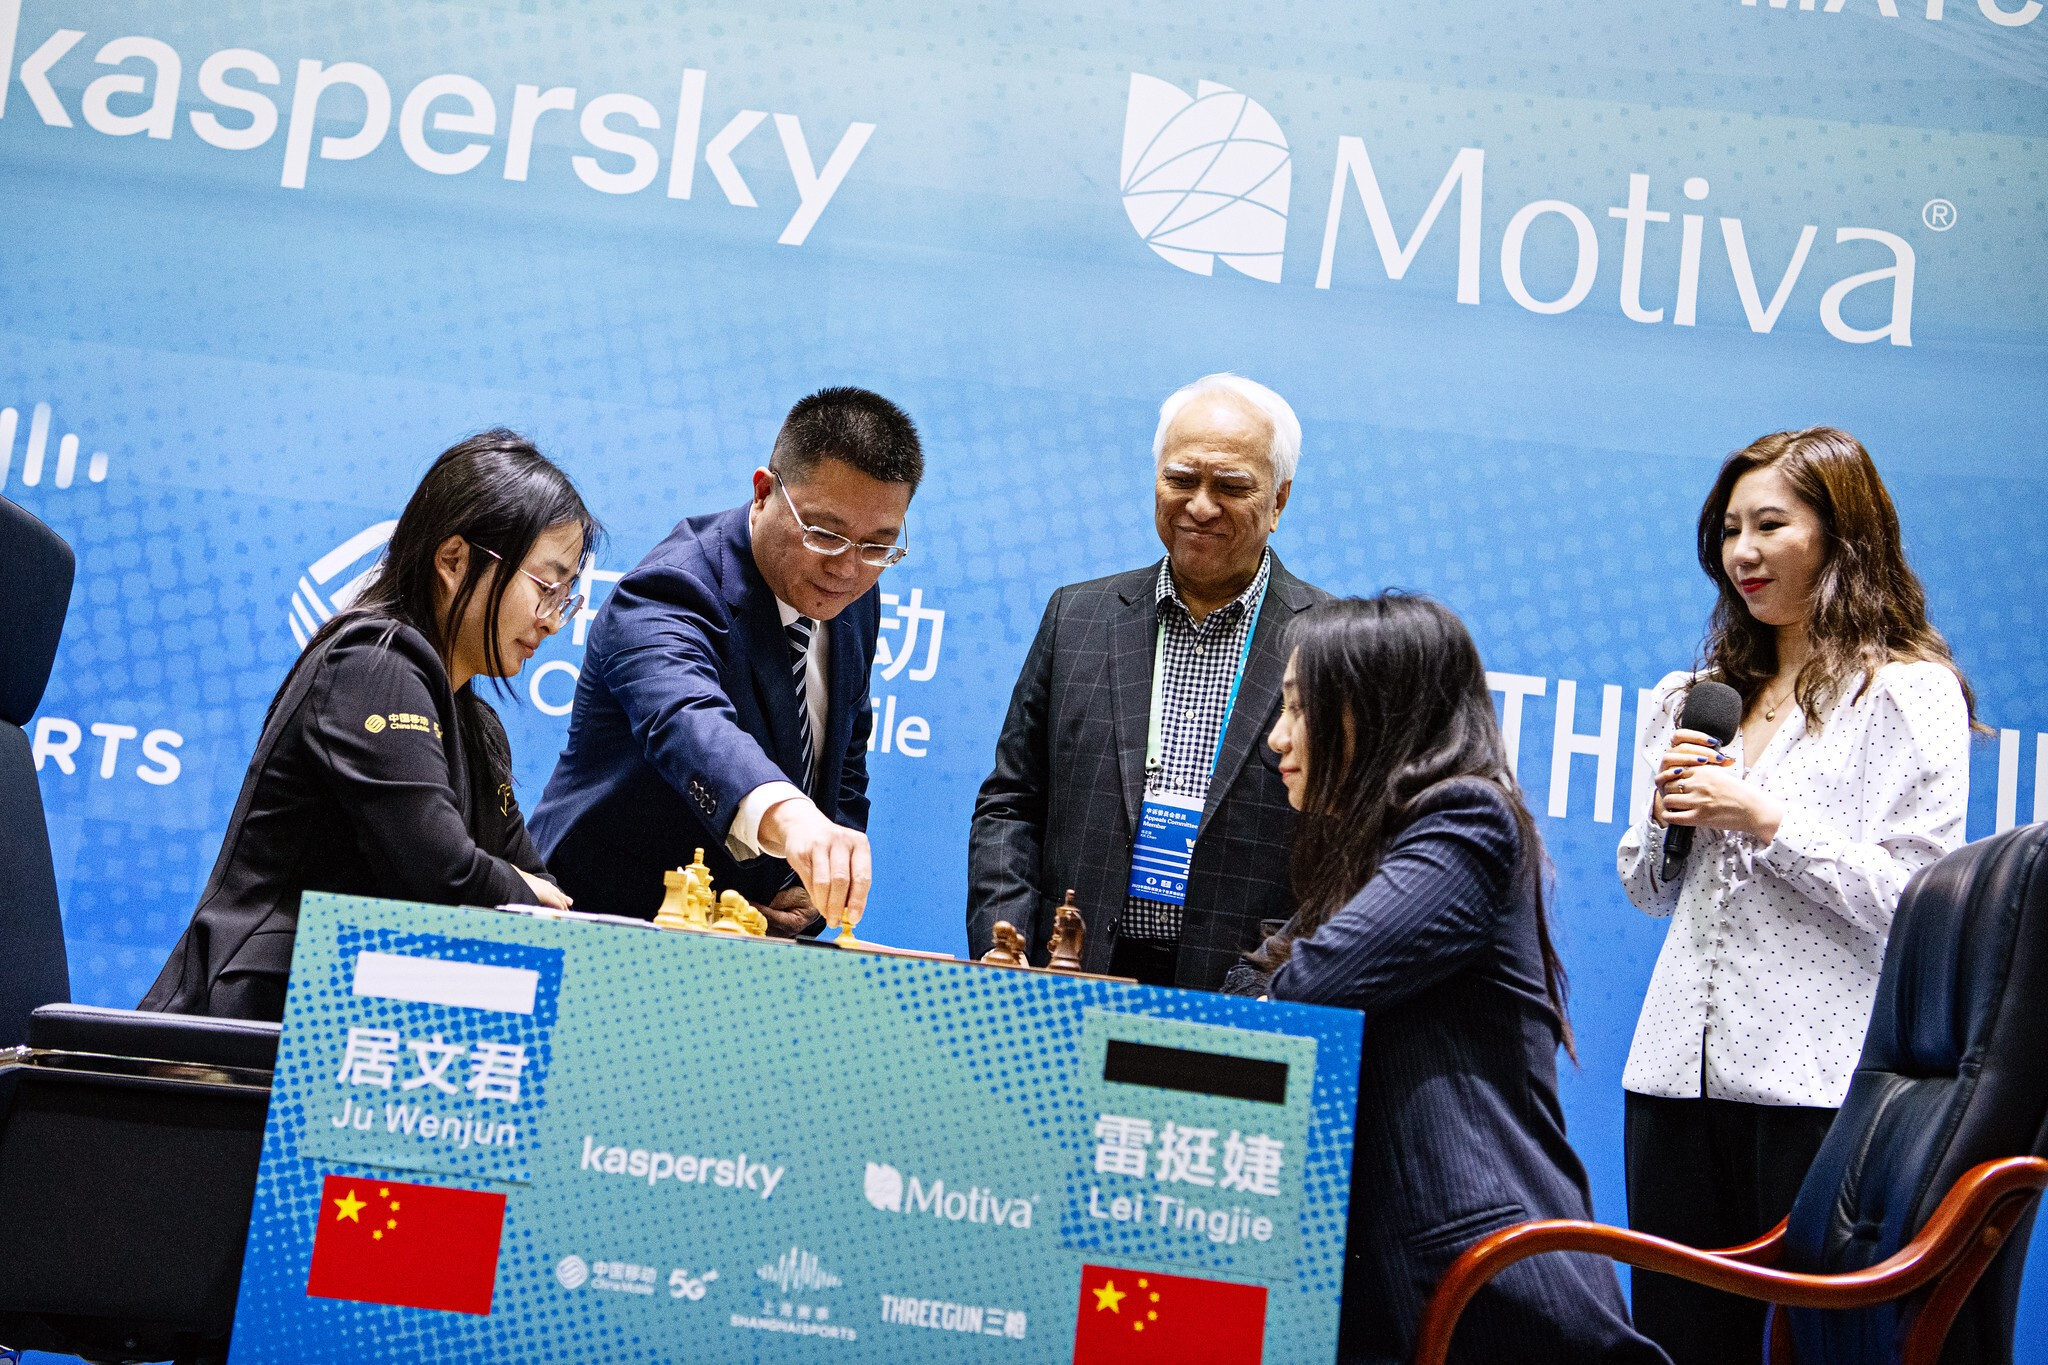 President of the Hong Kong Chess Federation KK Chan makes the ceremonial first move before game two of the FIDE Women's World Championship Match ©FIDE/Stev Bonhage